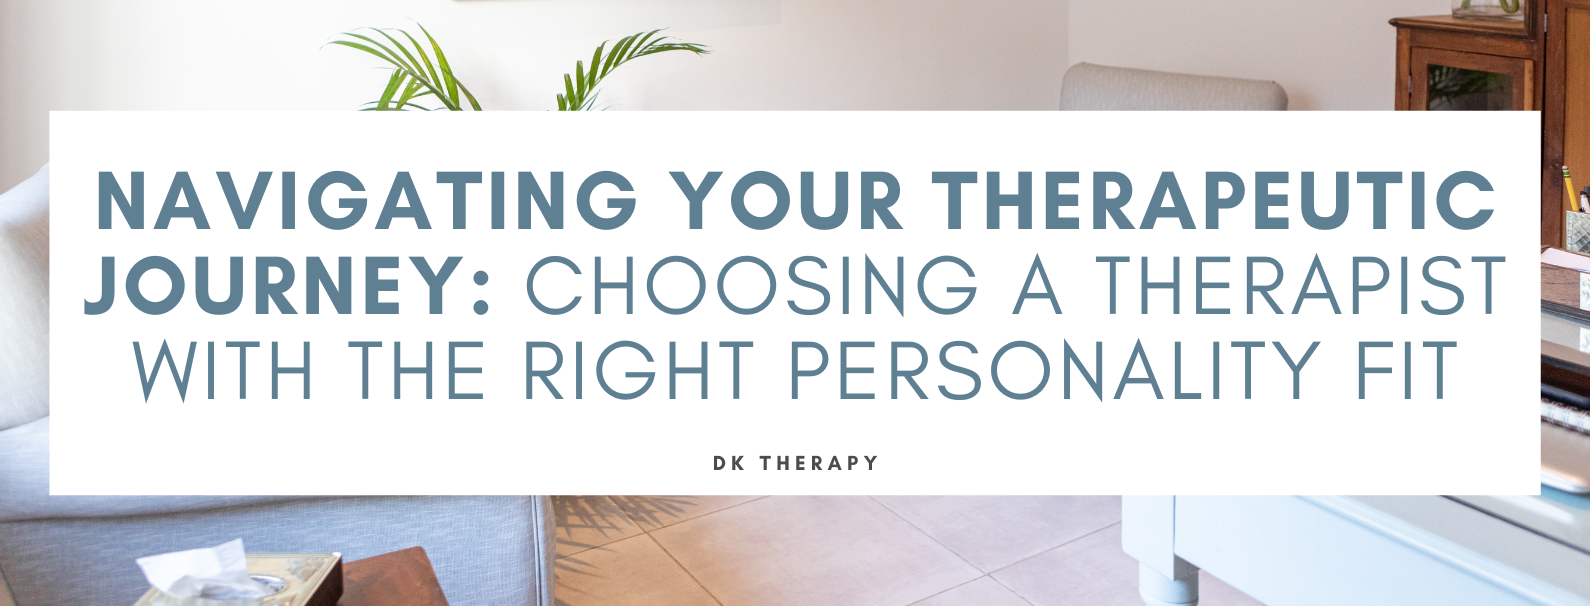 Navigating Your Therapeutic Journey Choosing a Therapist with the Right Personality Fit